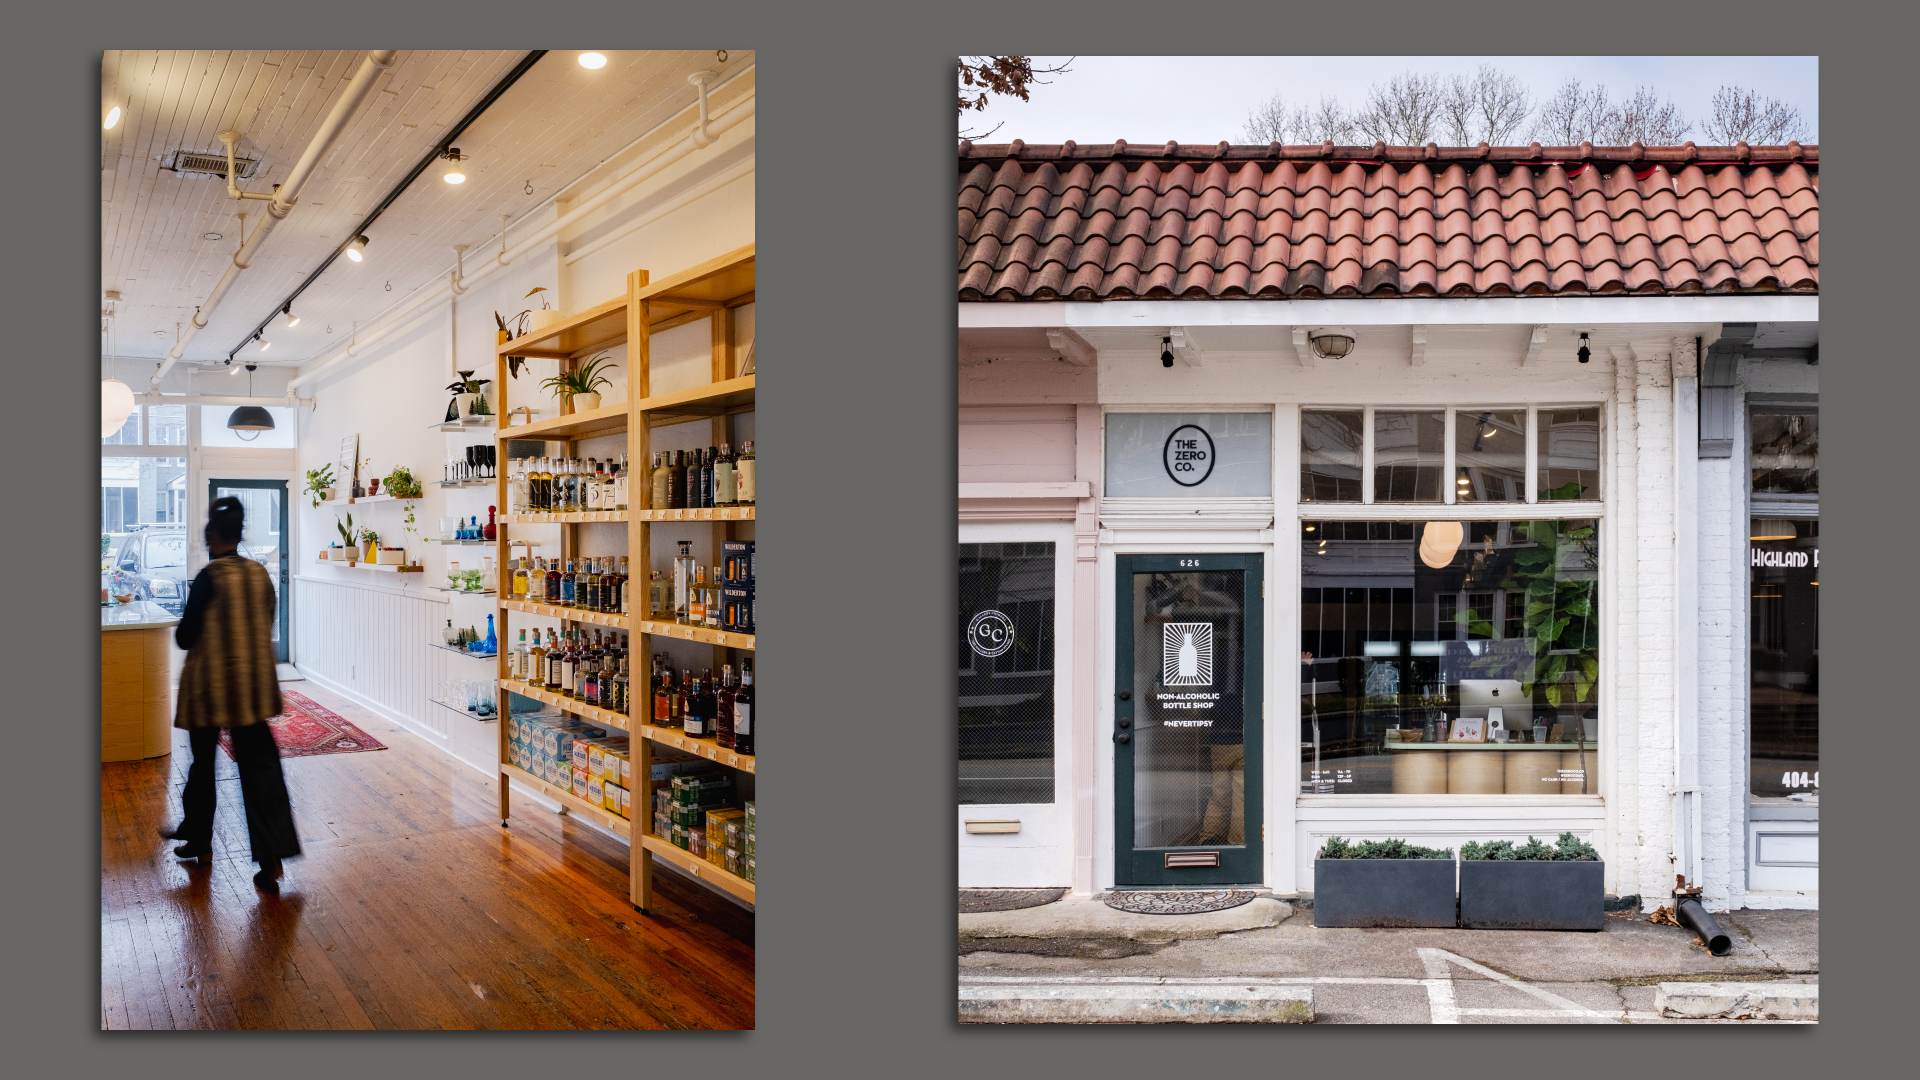 A side by side image of a person walking in a minimalist designed store with bottles on shelves and a storefront with terra cotta shingles